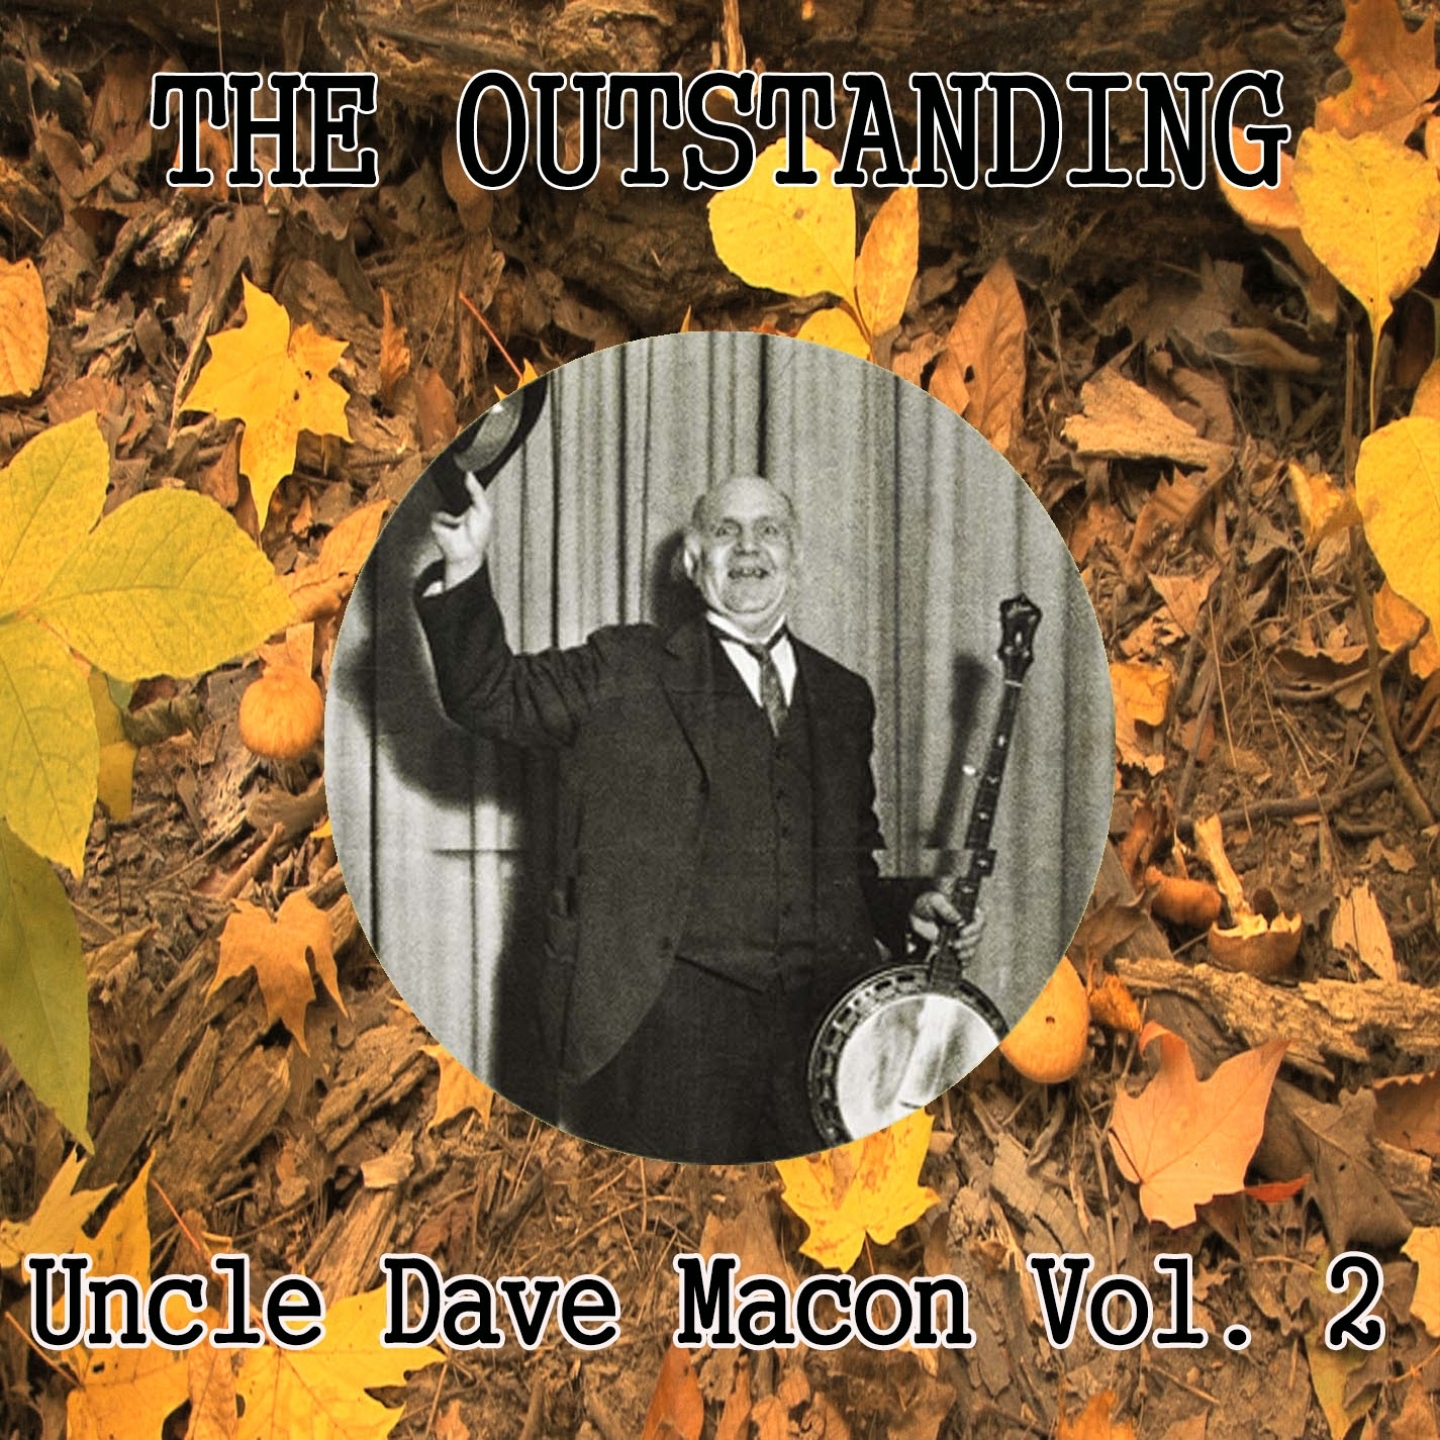 The Outstanding Uncle Dave Macon Vol. 2